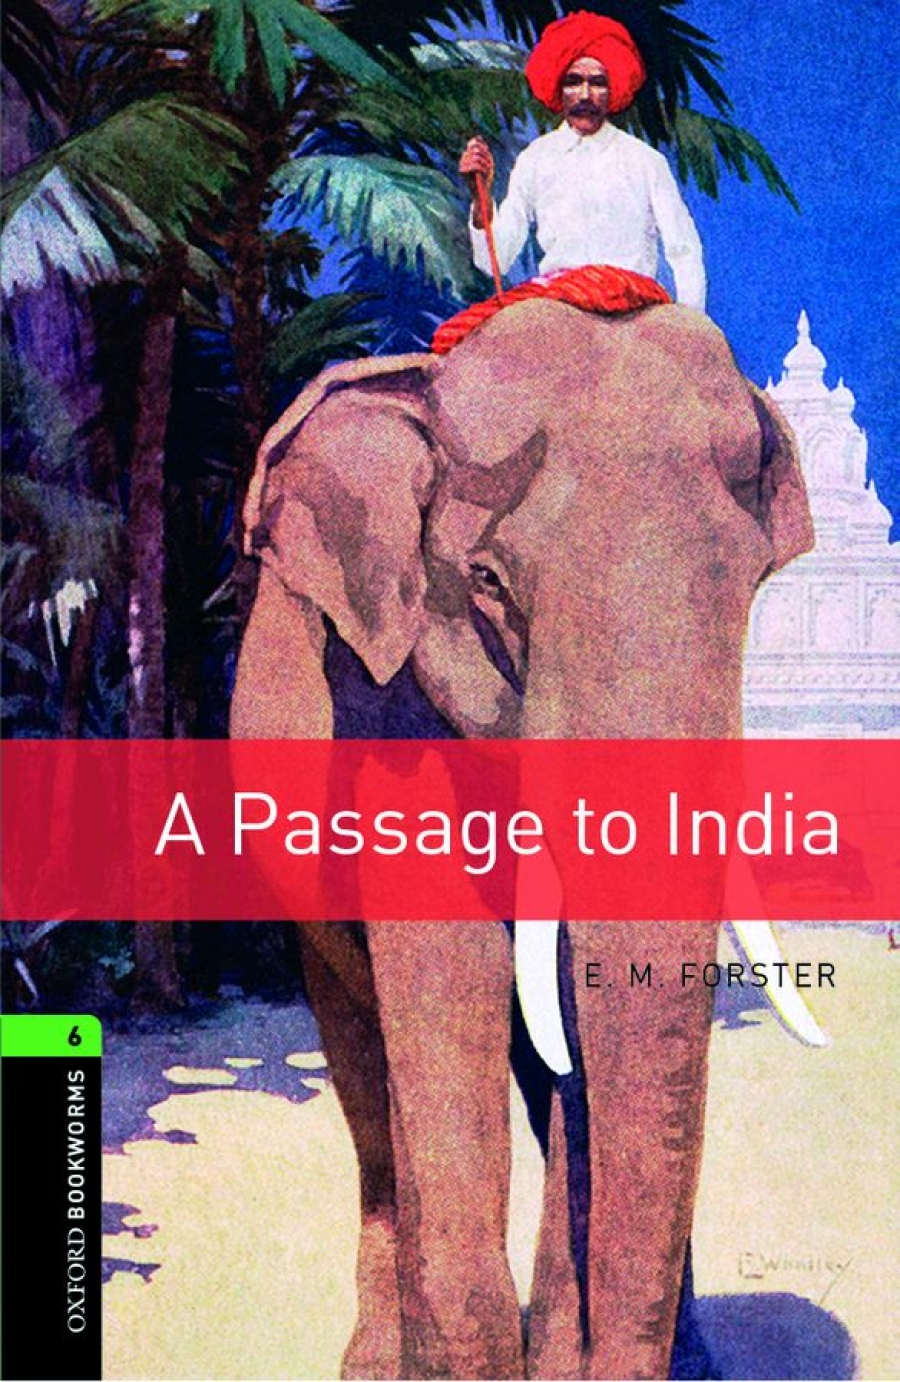 E. M. Forster OBL 6: A Passage To India 